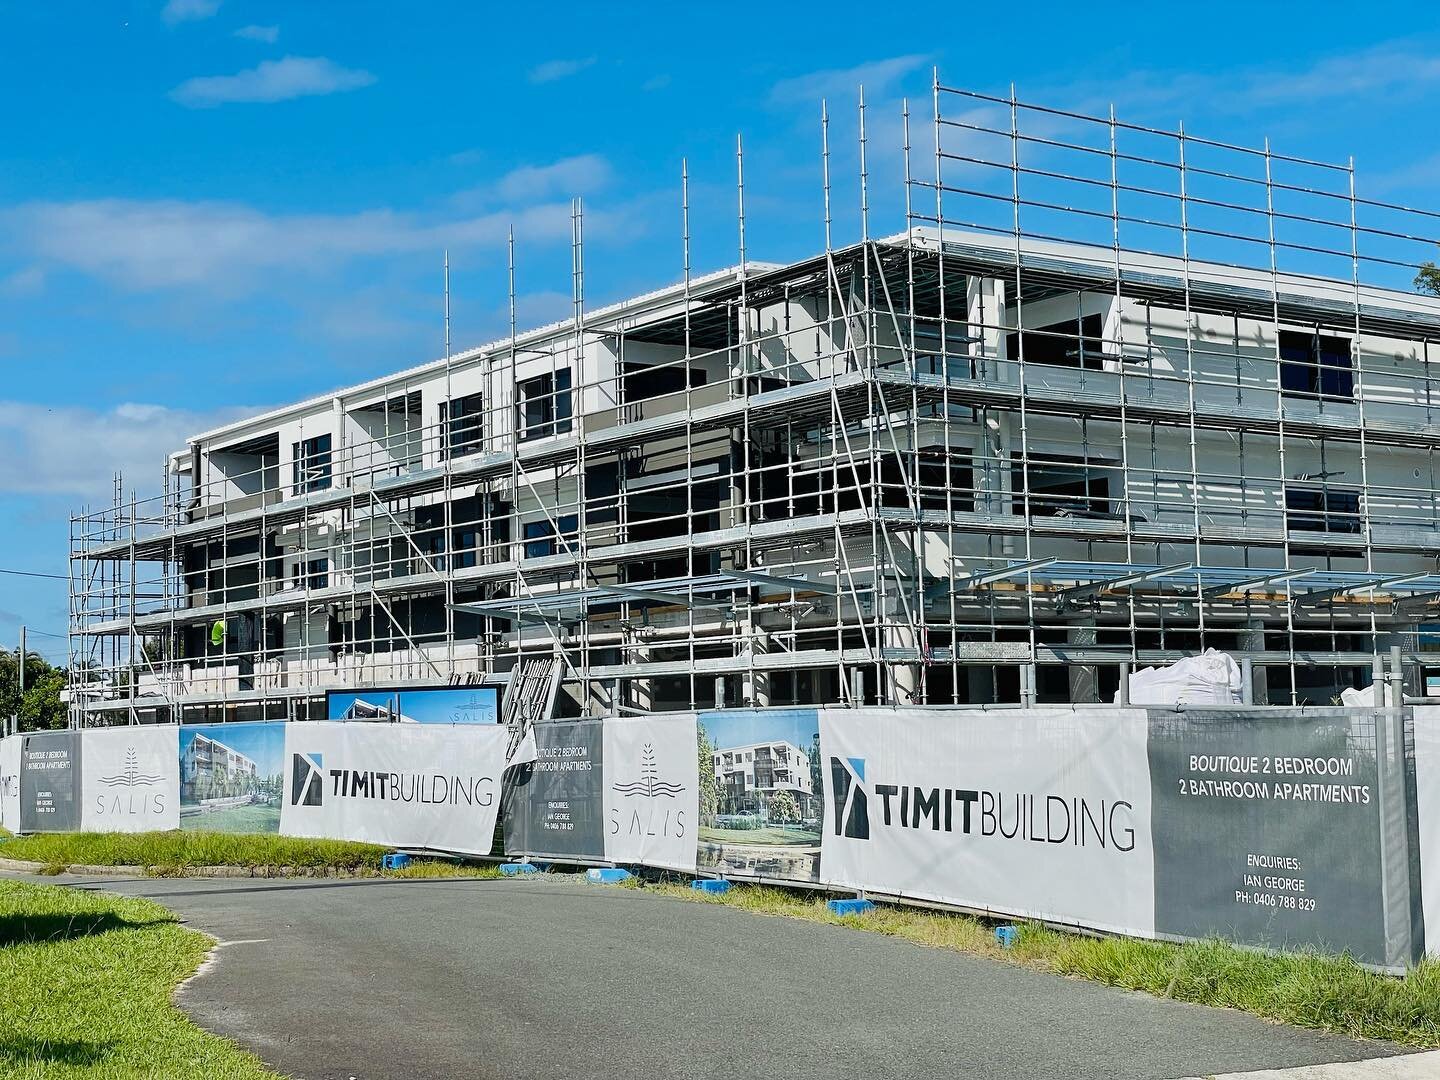 It&rsquo;s always a pleasure working with the professional team @timit.building 
This epic 3 story complex at Golden Beach, including 10 residential units, 1 retail store and a car park, has been a dream to work on.

BUILD &bull; @timit.building 
ELE